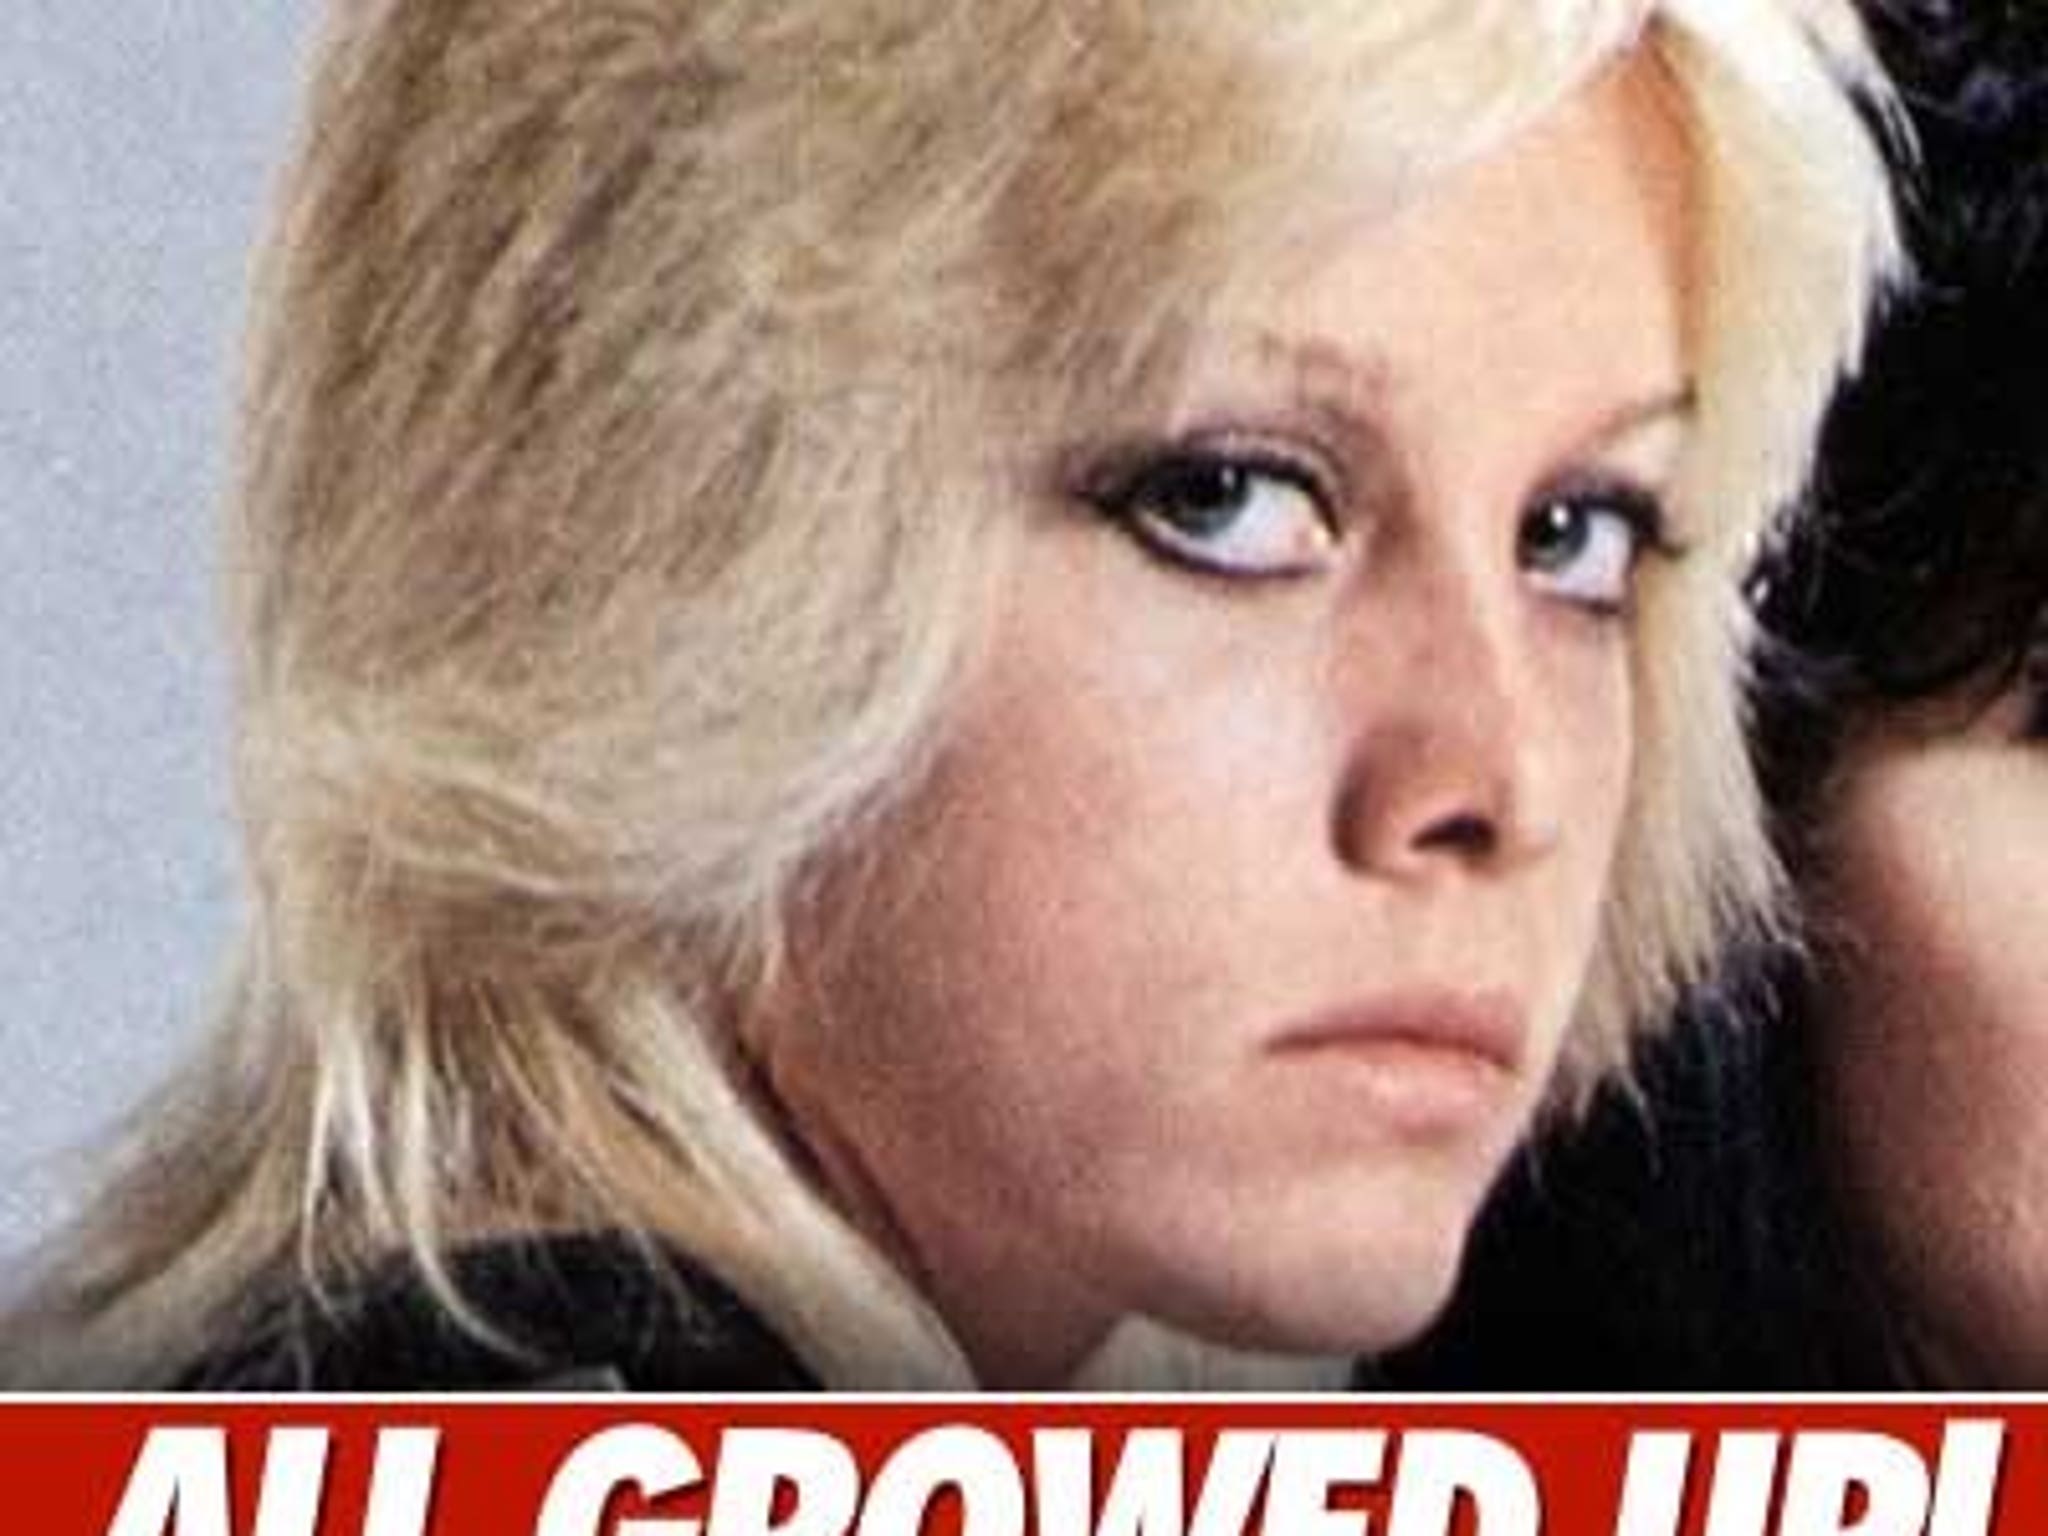 Cherie Currie Wallpapers